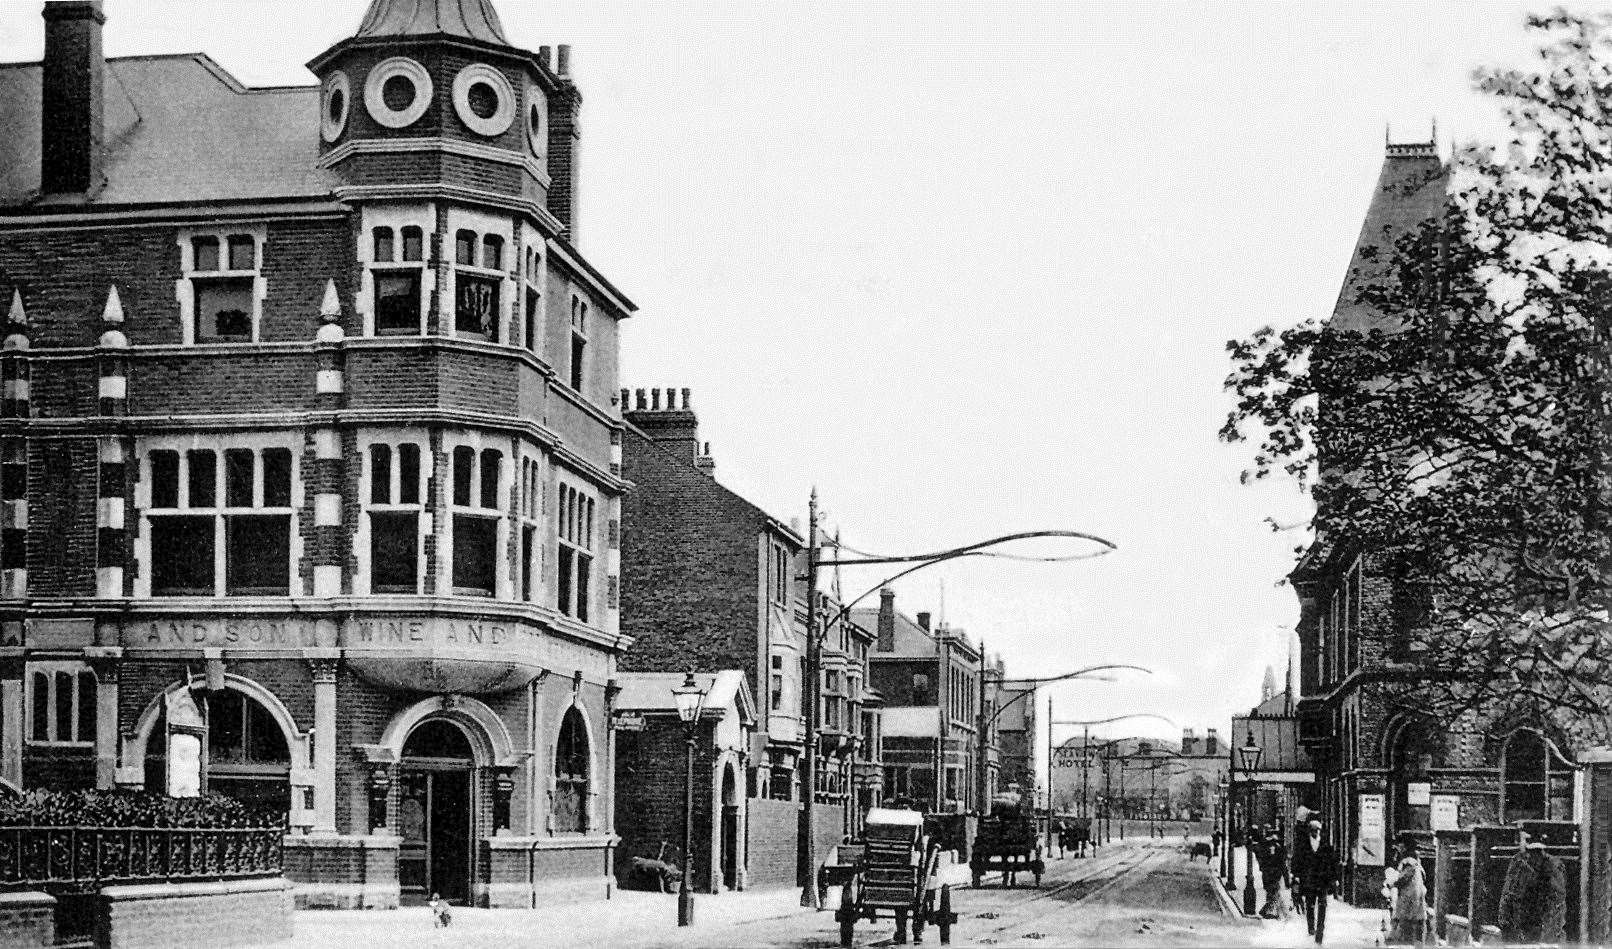 The Royal in 1922. Picture: courtesy of Sheppey Local History Group